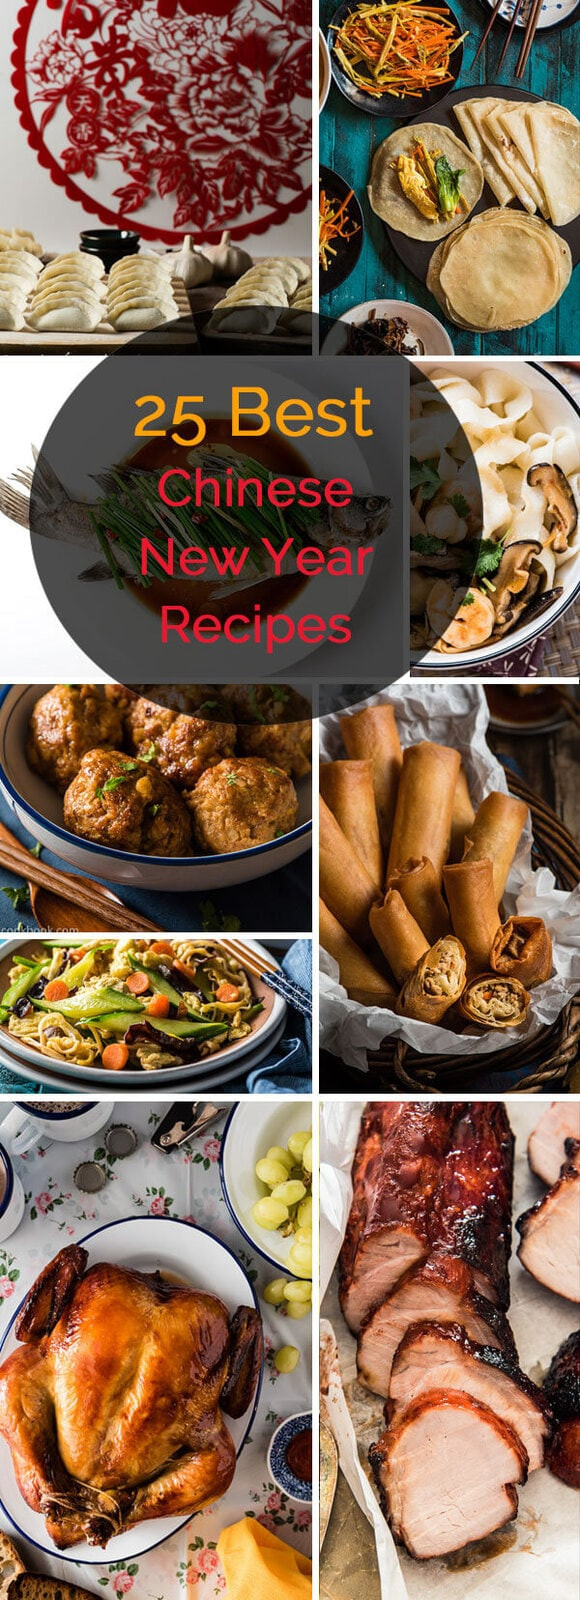 Chinese New Year Food Recipe
 Top 25 Chinese New Year Recipes